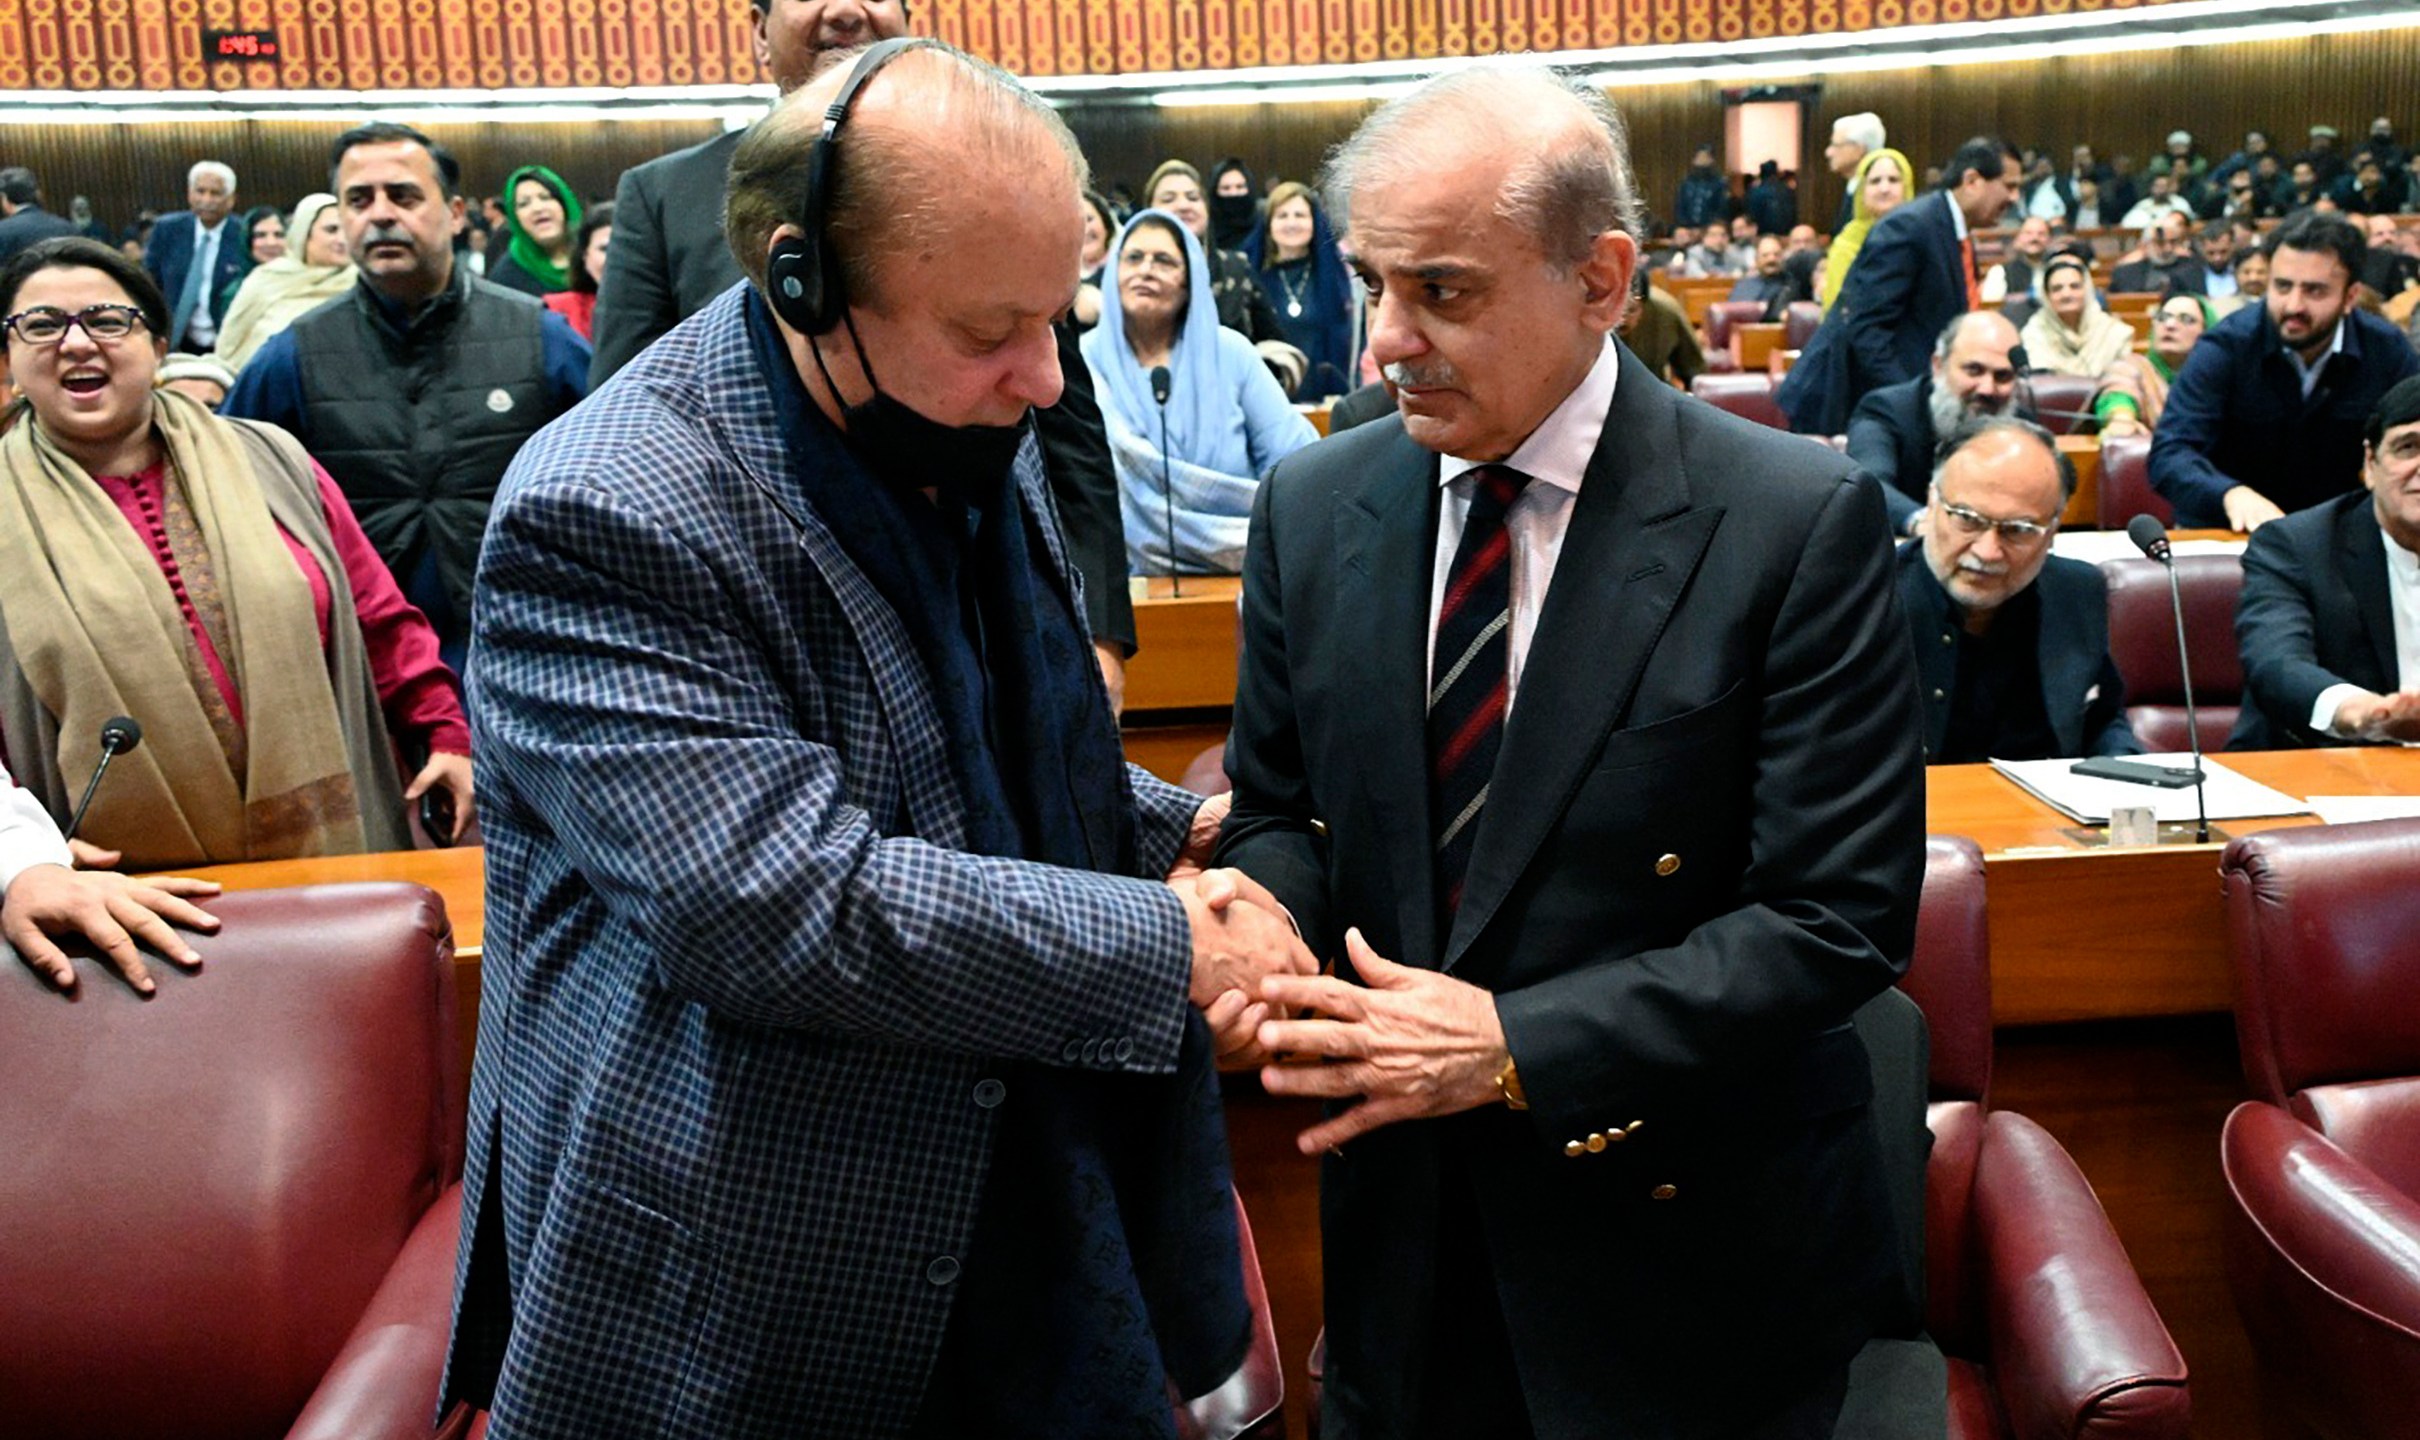 In this photo released by the National Assembly office, Pakistan's newly elected Prime Minister Shehbaz Sharif, foreground right, is congratulated by his elder brother and former Prime Minister Nawaz Sharif following his appointment, at a parliament session, in Islamabad, Pakistan, Sunday, March 3, 2024. Lawmakers in Pakistan's National Assembly elected Sunday Shehbaz Sharif as the country's new prime minister for the second time as allies of imprisoned former premier Imran Khan in parliament shouted in protest, alleging rigging in last month's election. (National Assembly Office via AP)